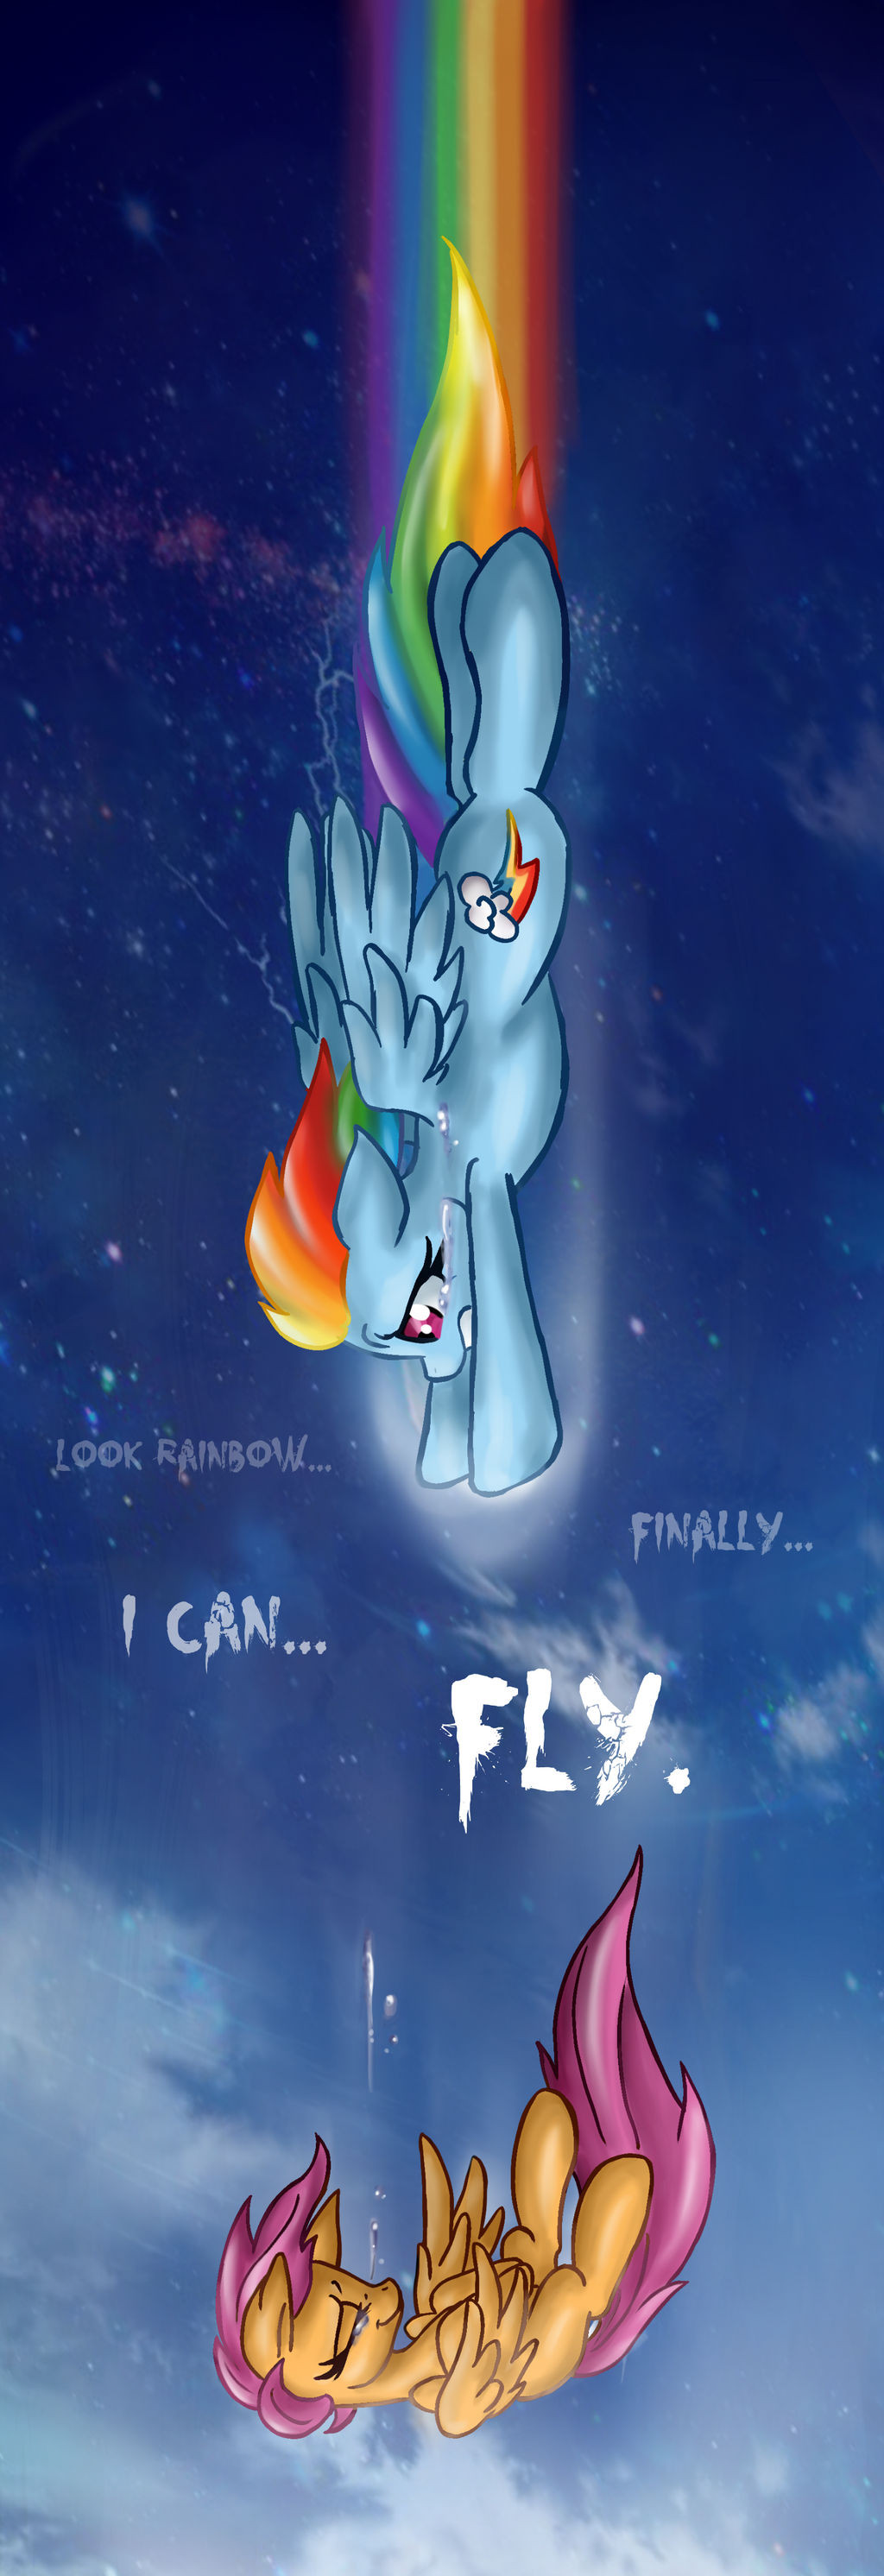 look____finally_i_can_fly____by_rainbowspine-d5yc366.png